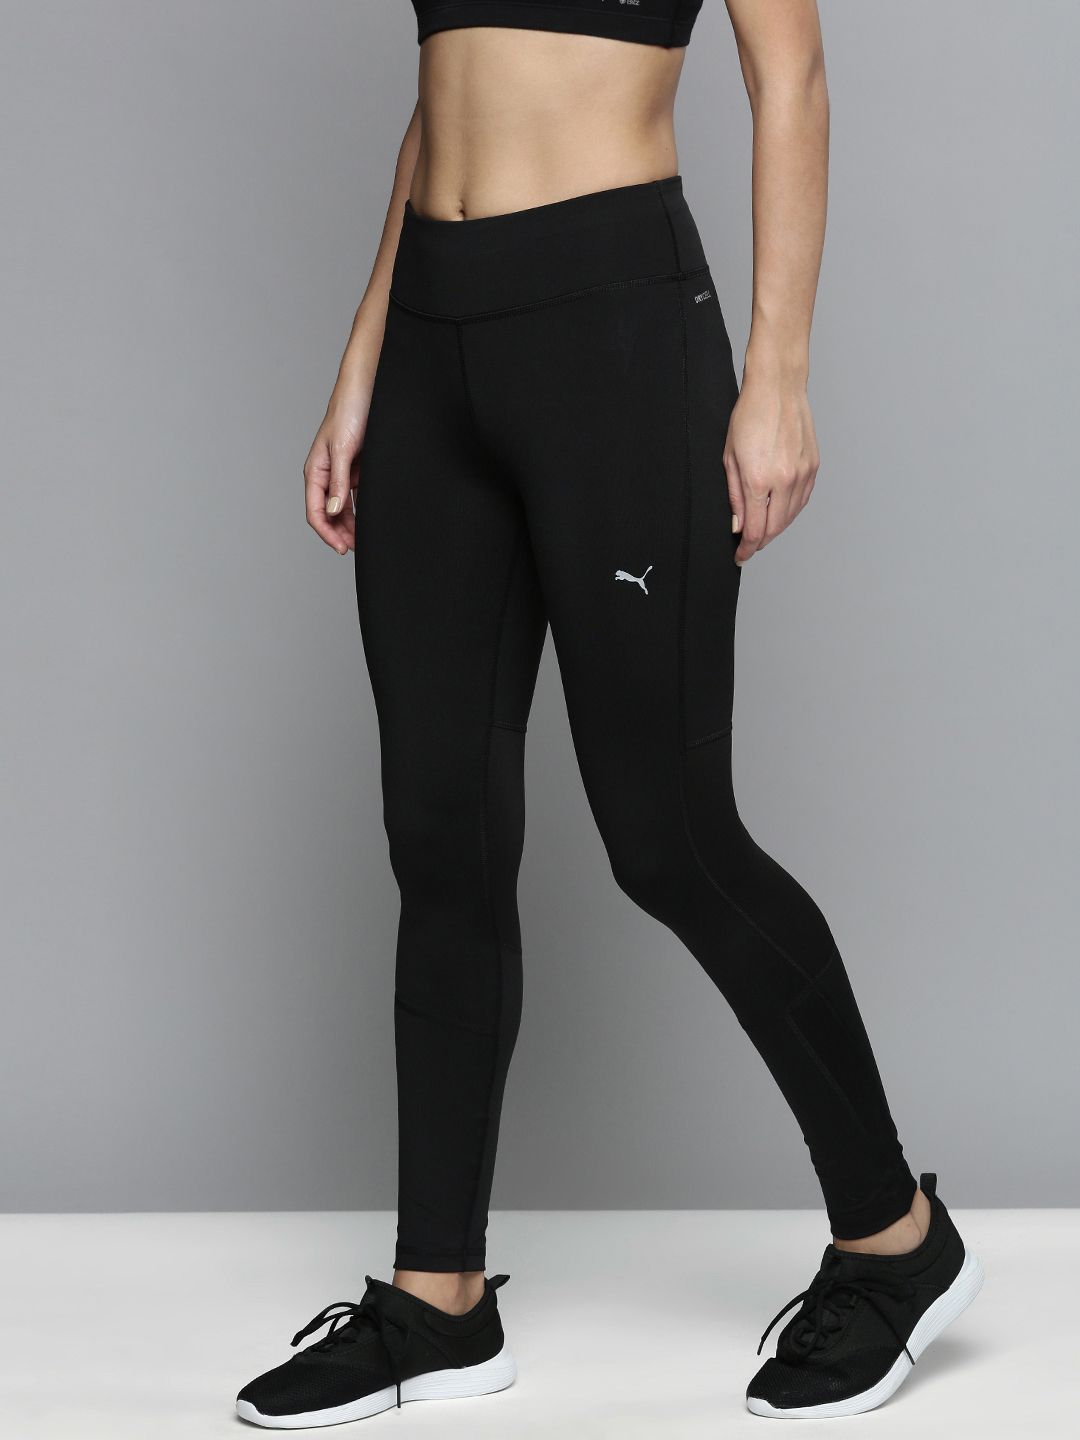 Puma Women Black Solid Slim Fit dryCELL Running Tights Price in India